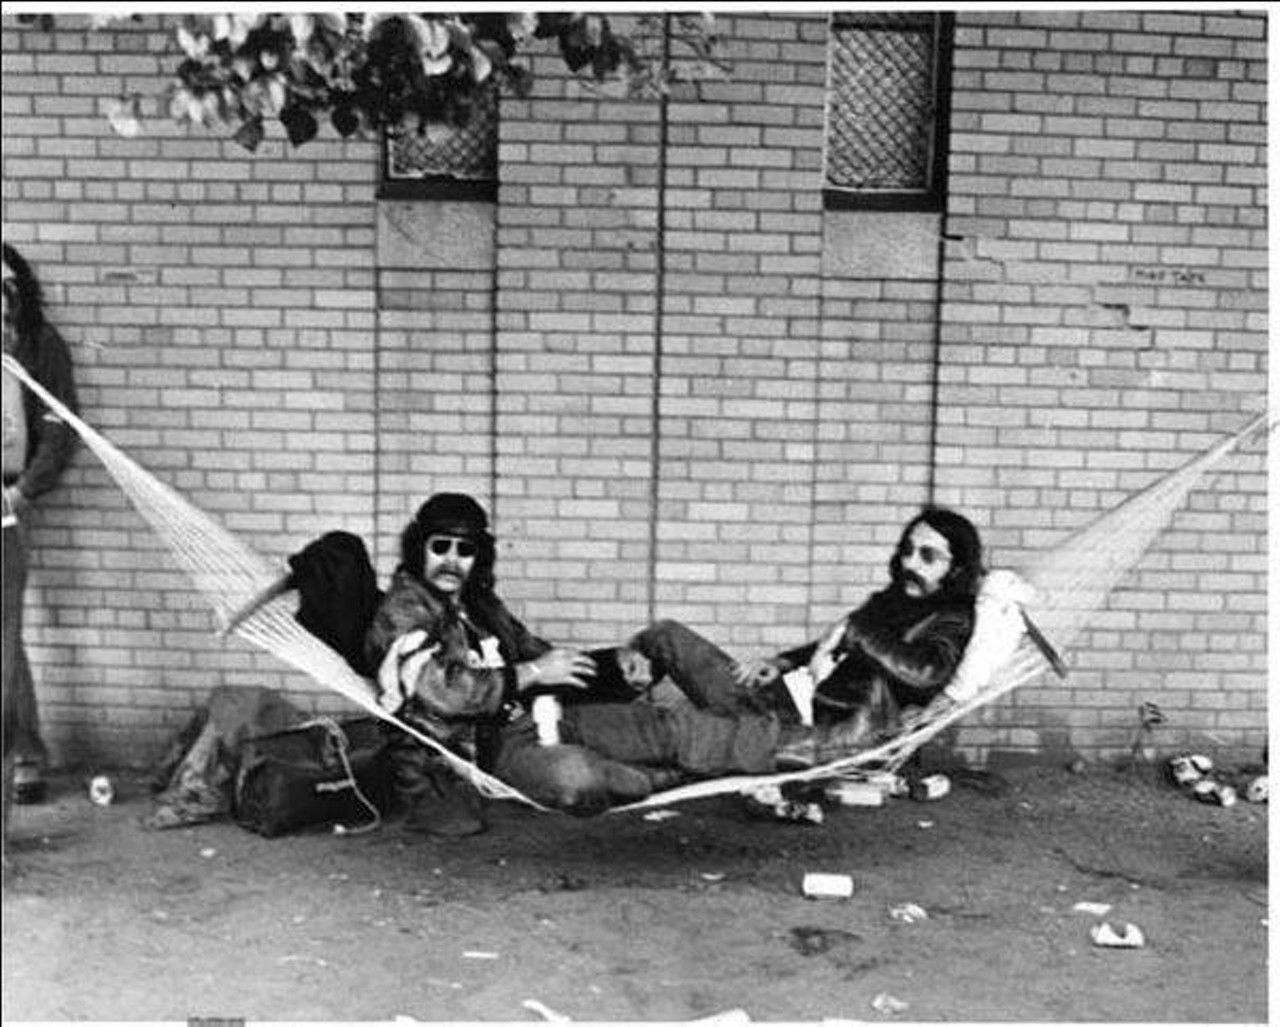  Fans in Hammock Waiting for Rolling Stones Concert, Municipal Stadium, 1975 